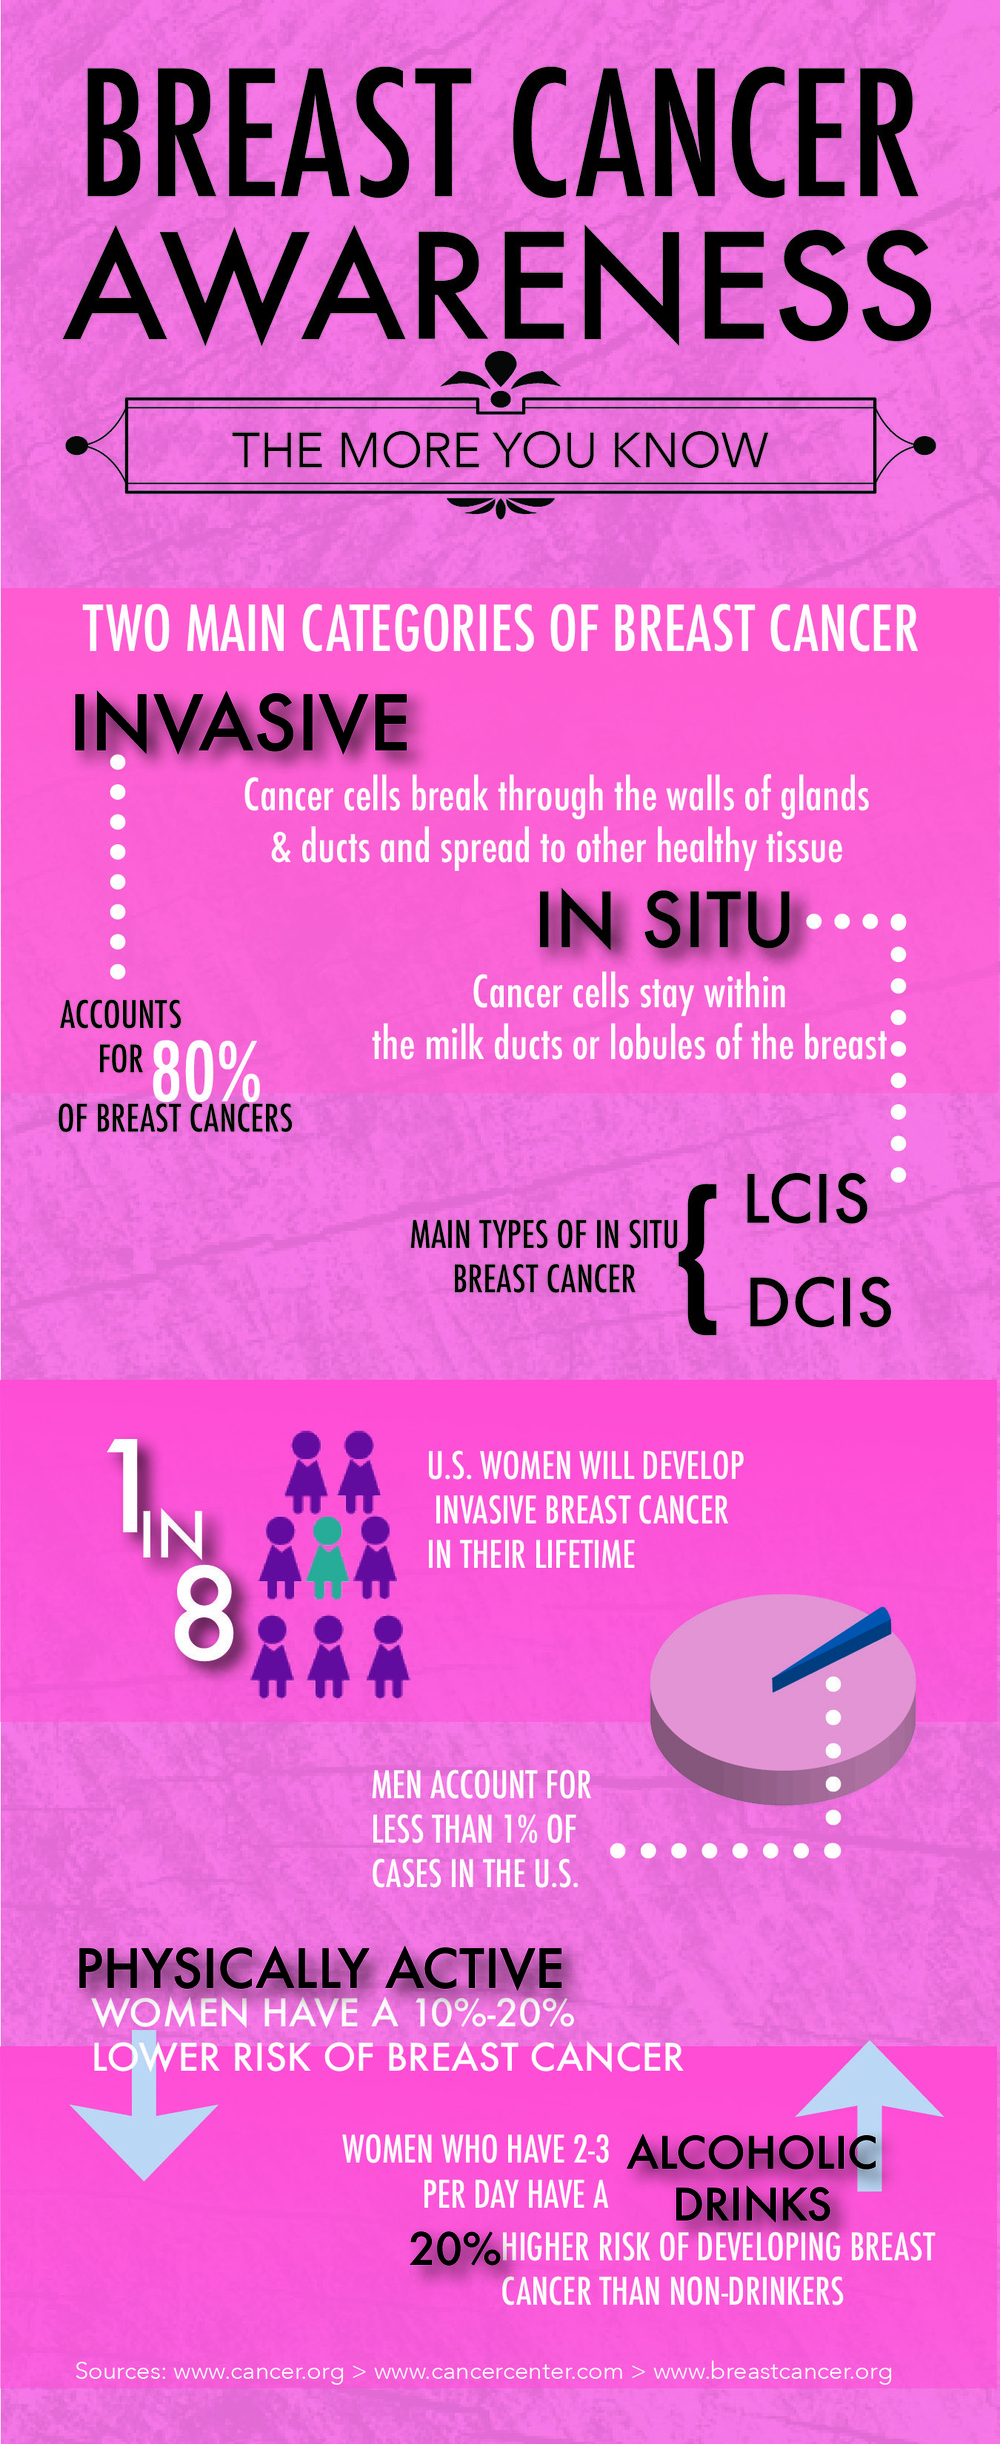 Breast Cancer Awarness Month Infographic